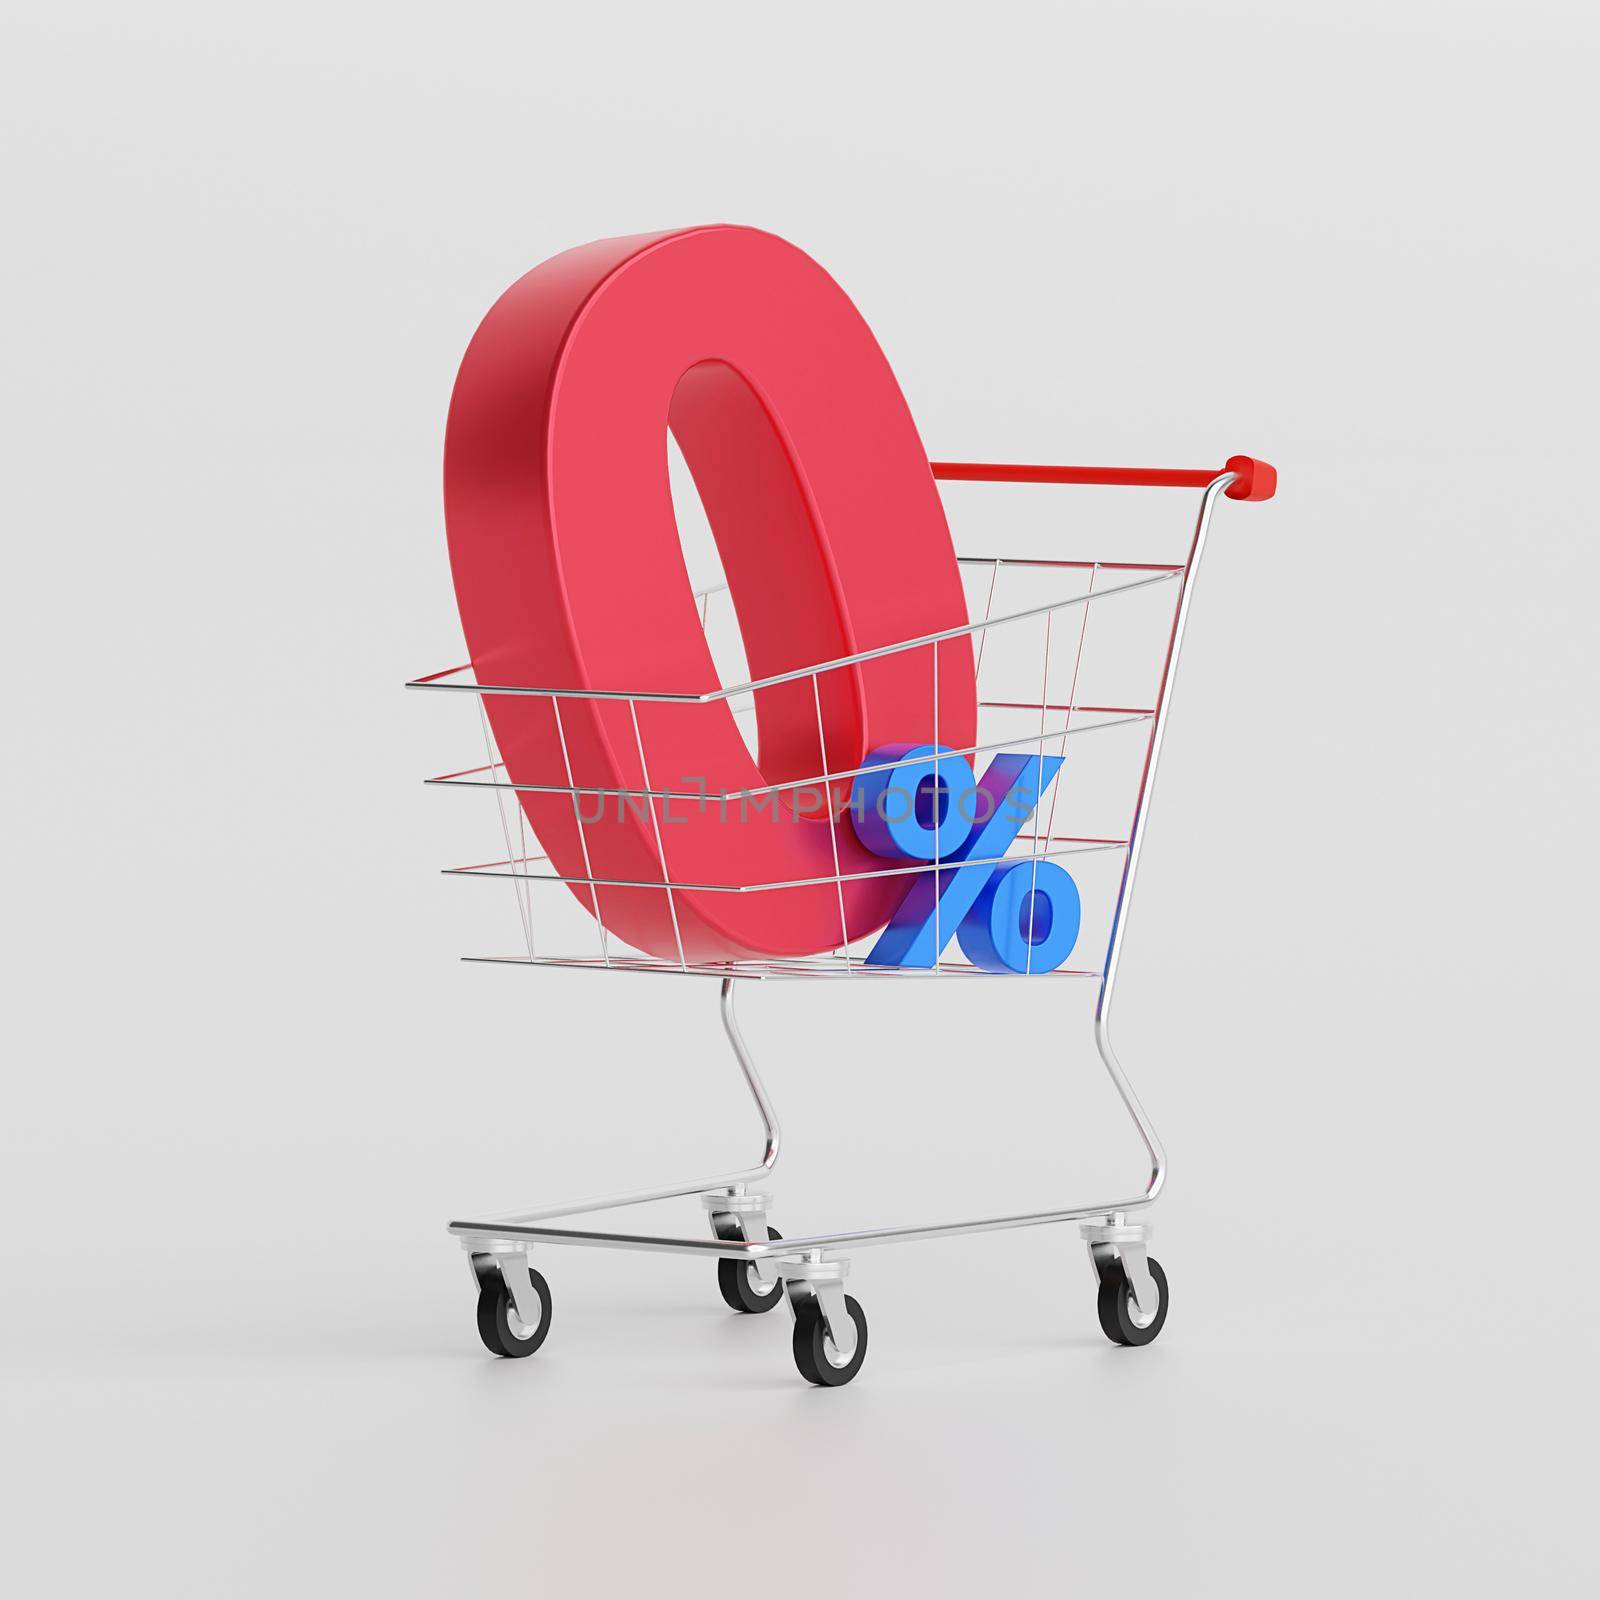 Zero percent, 0% interest special offer installment payment with cart, 3d illustration